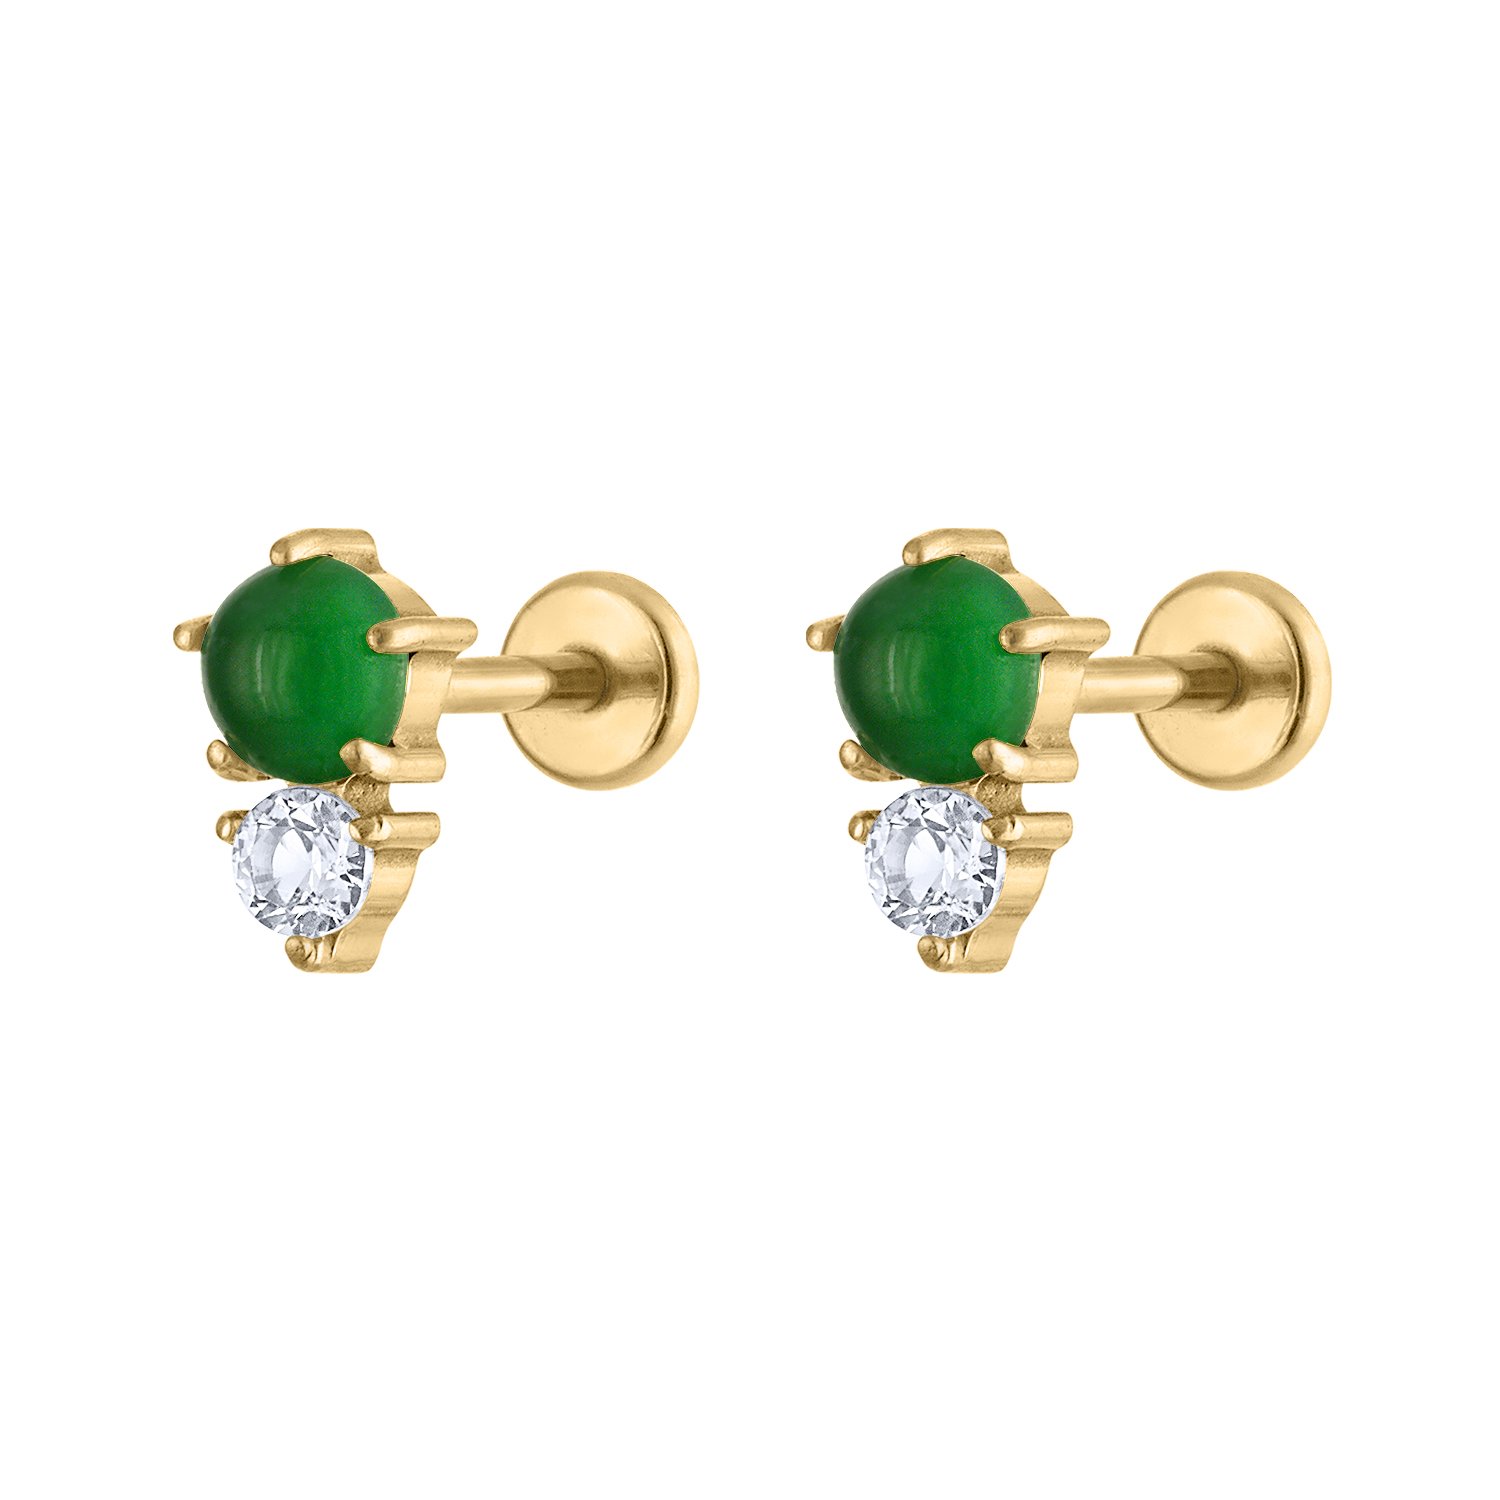 A1Jewellers - 22ct Indian/Asian Gold Ball Stud Earrings... | Facebook